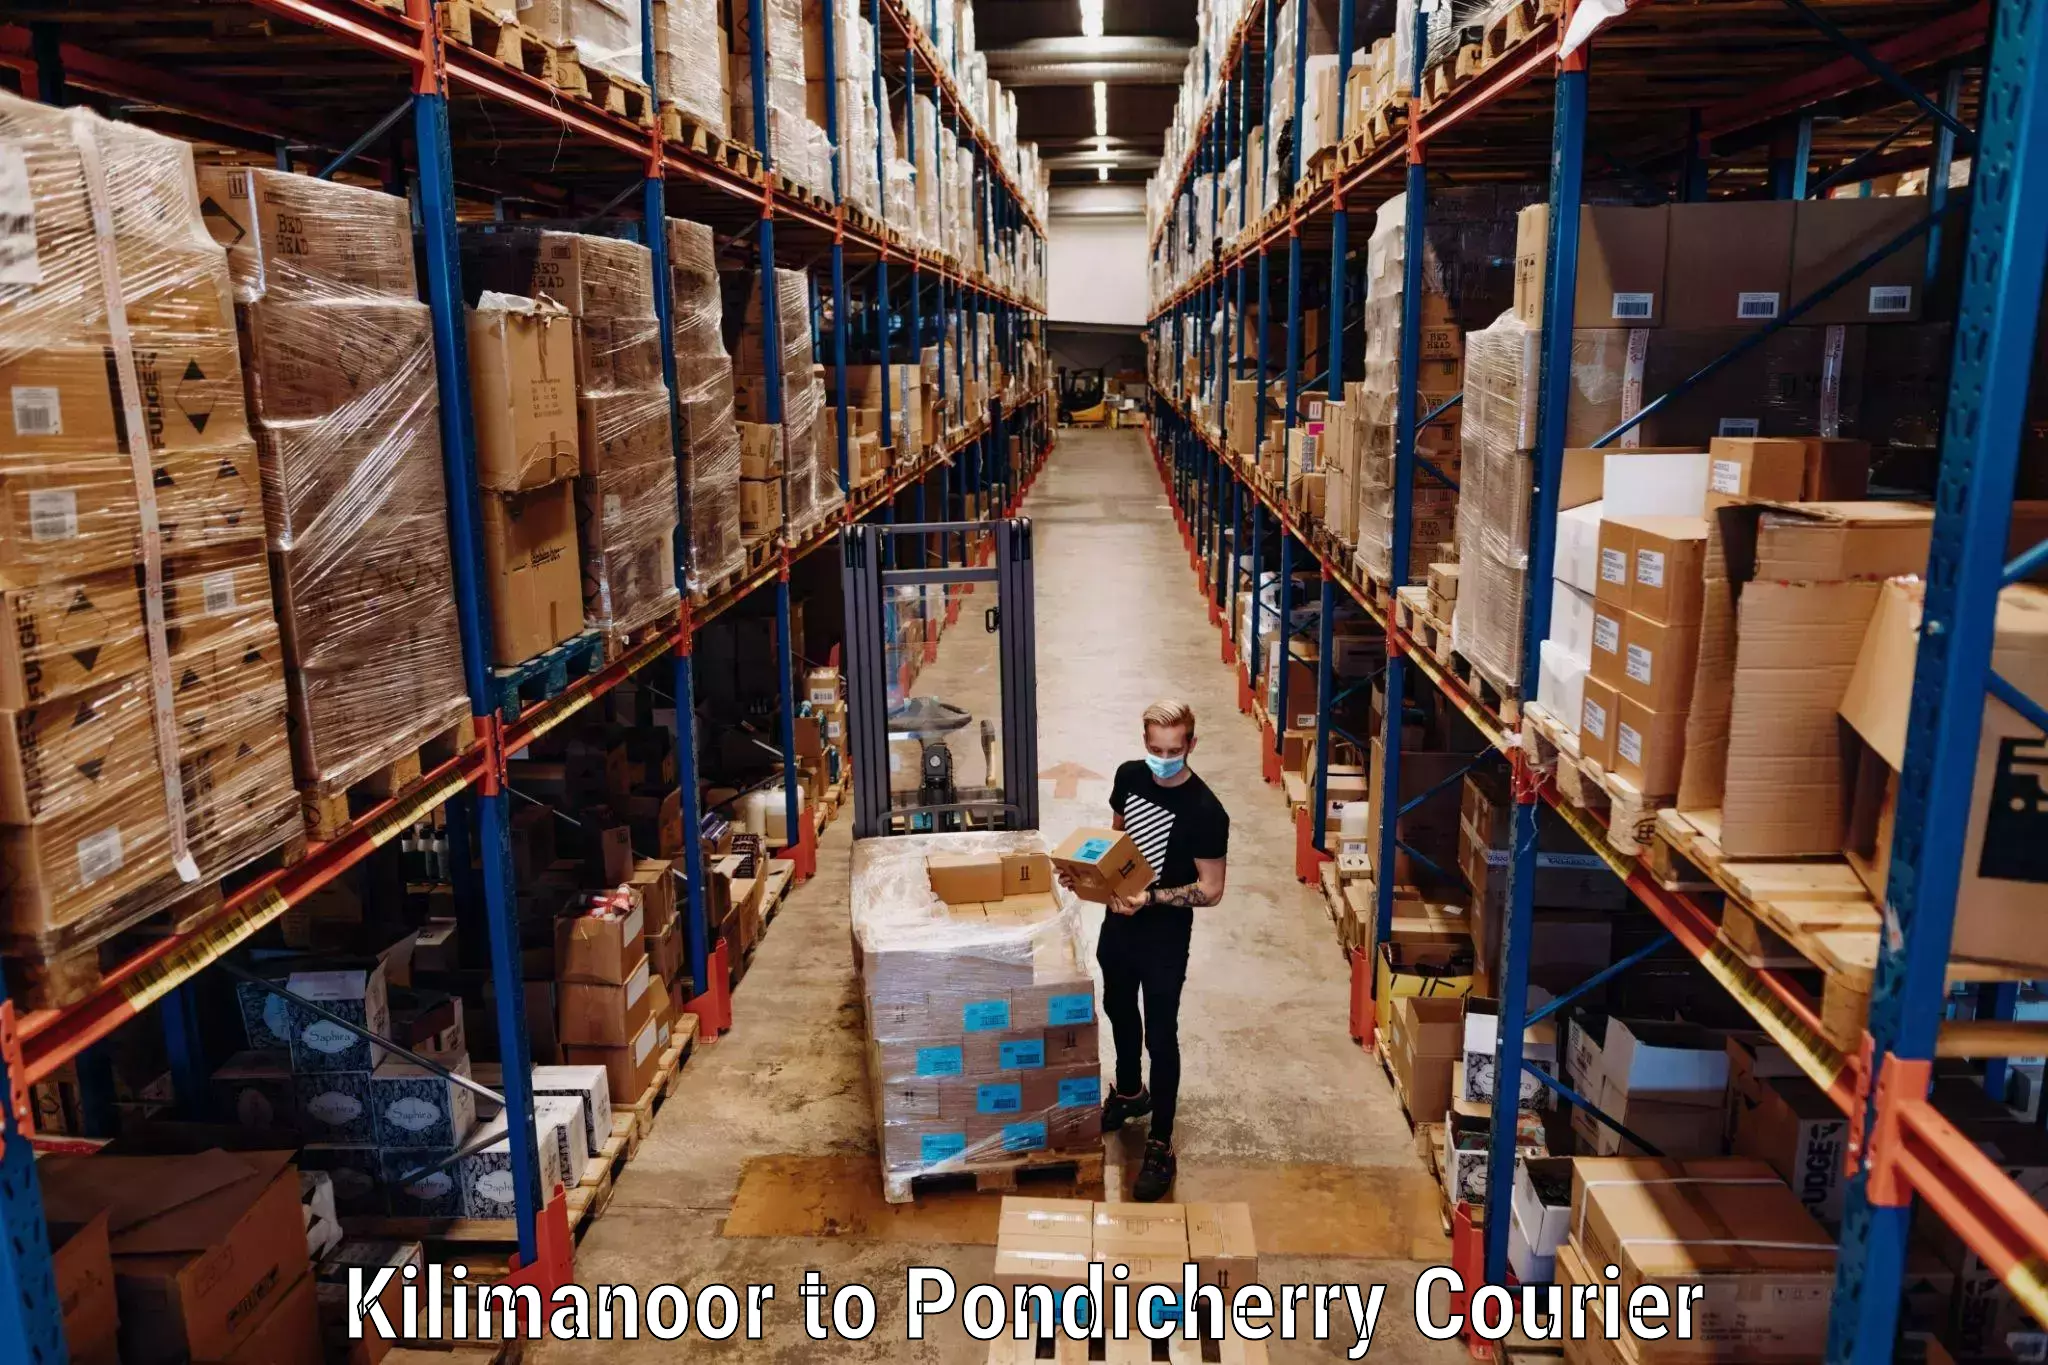 Luggage shipment specialists Kilimanoor to Pondicherry